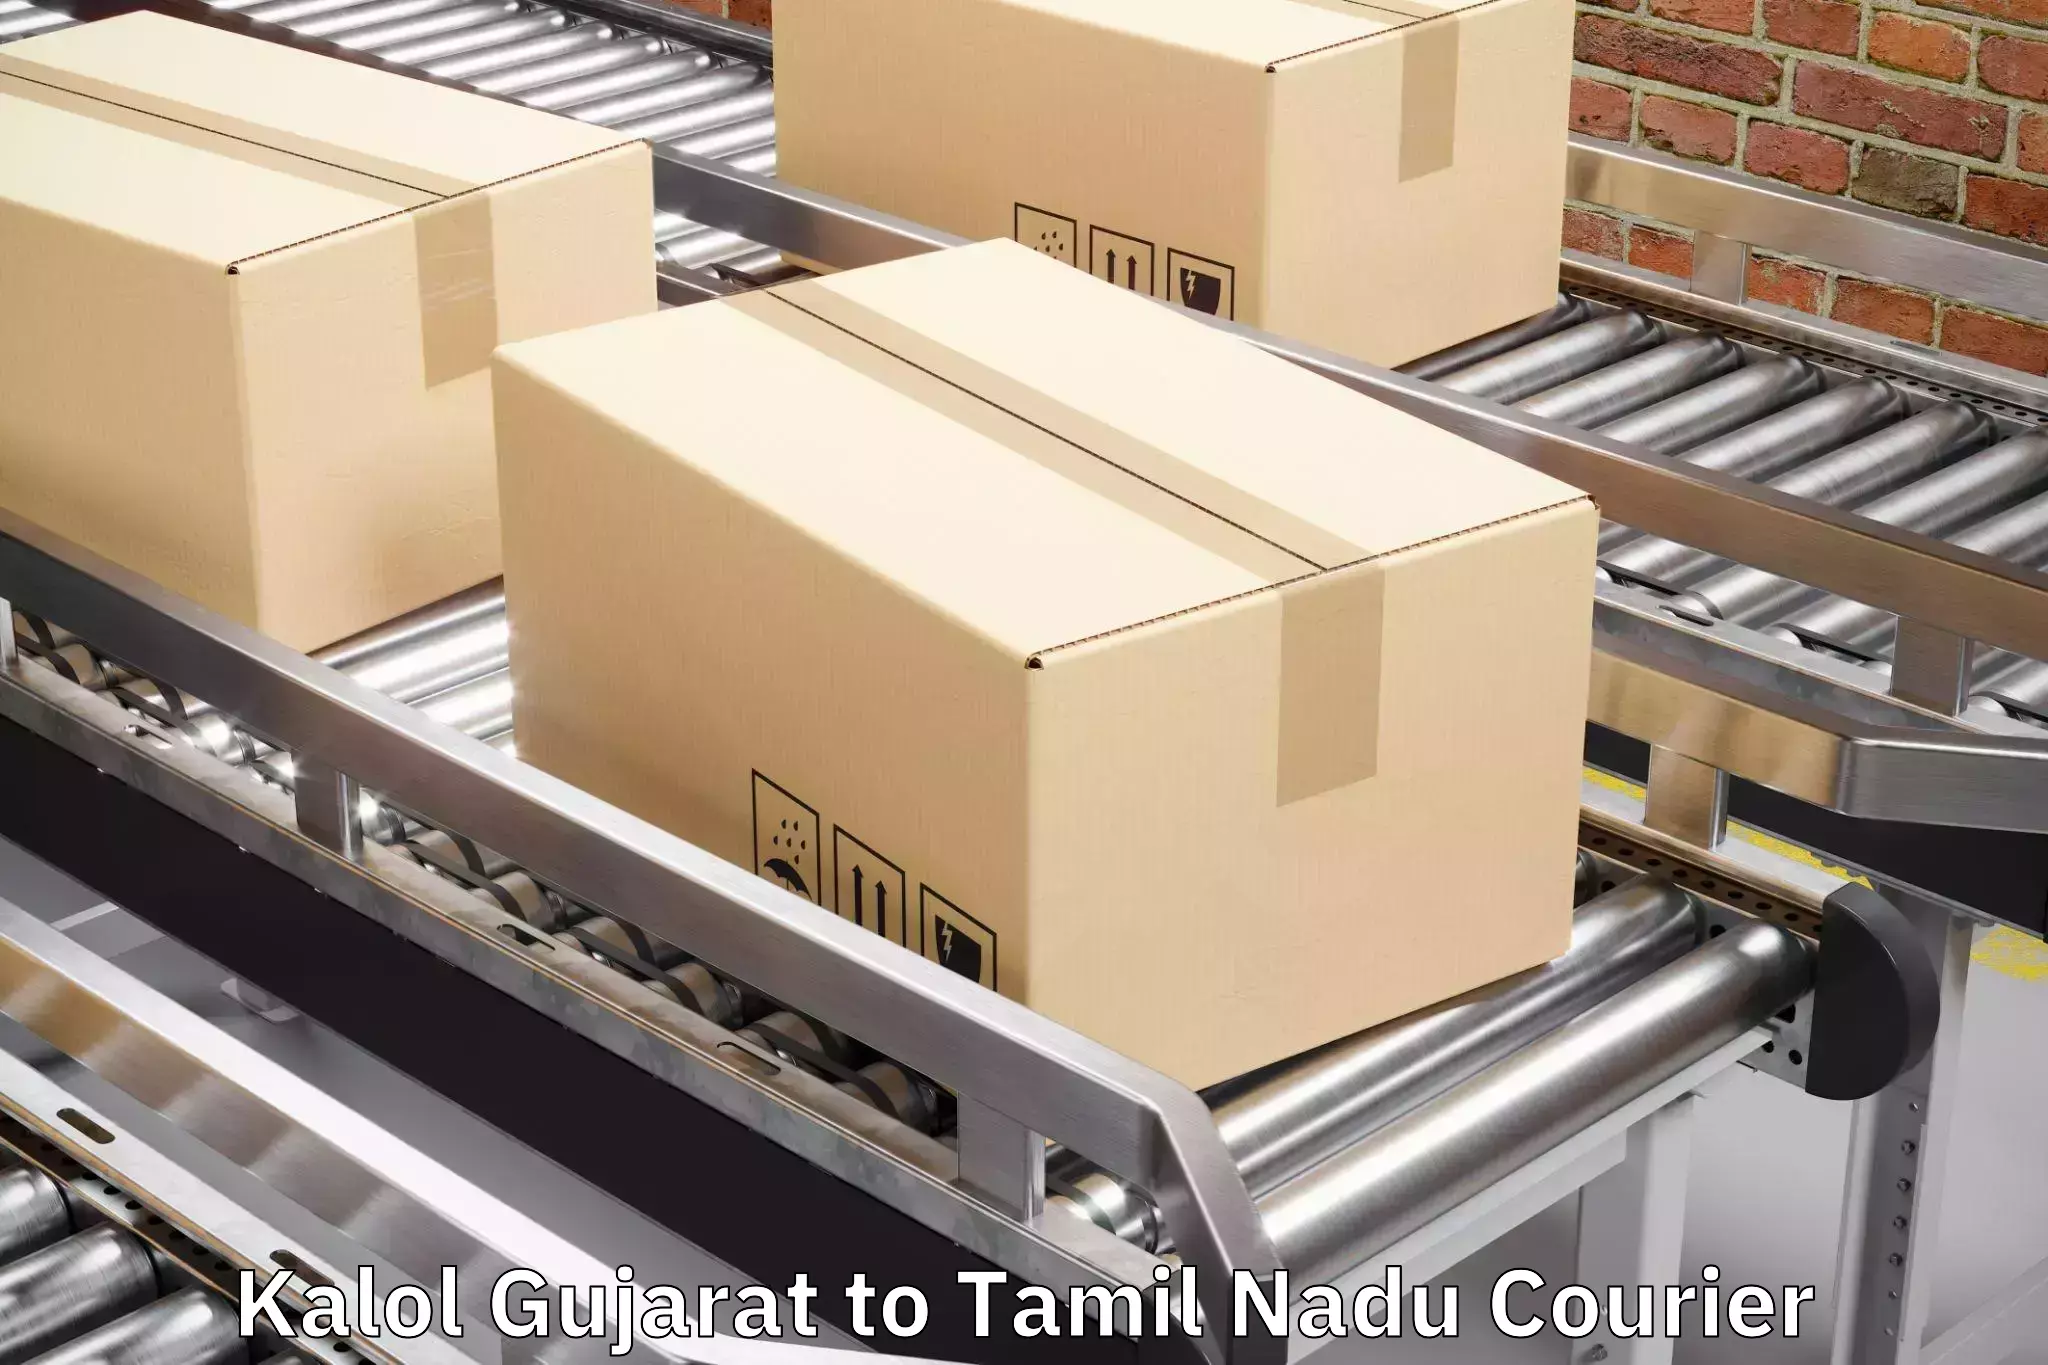 Streamlined baggage delivery Kalol Gujarat to Shanmugha Arts Science Technology and Research Academy Thanjavur